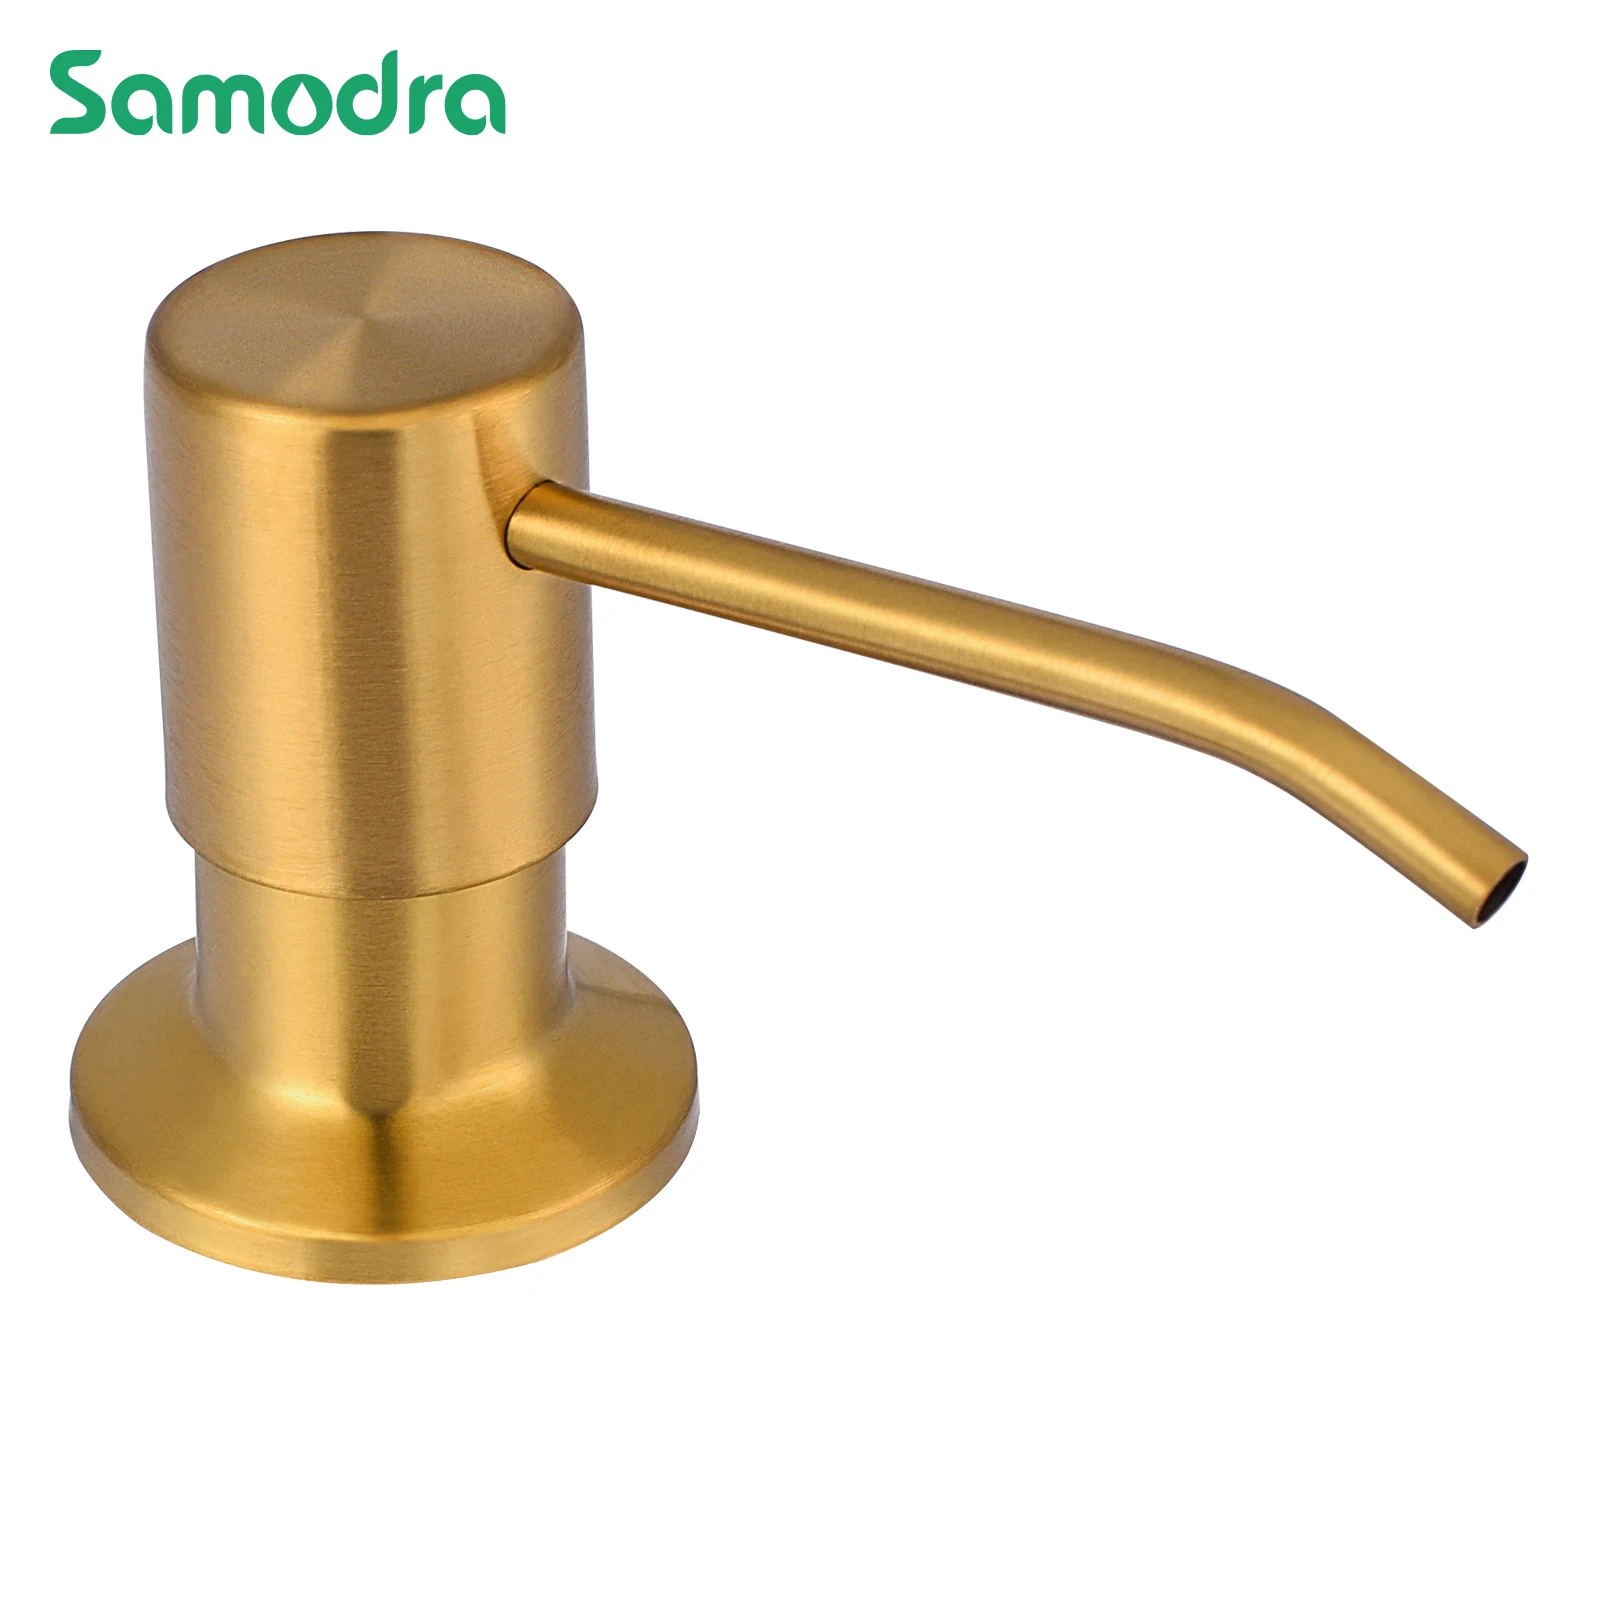 SAMODRA Gold Liquid Soap Dispenser With For Kitchen Sink Premium Stainless Steel Pump Head Brushed Nickel Replacement